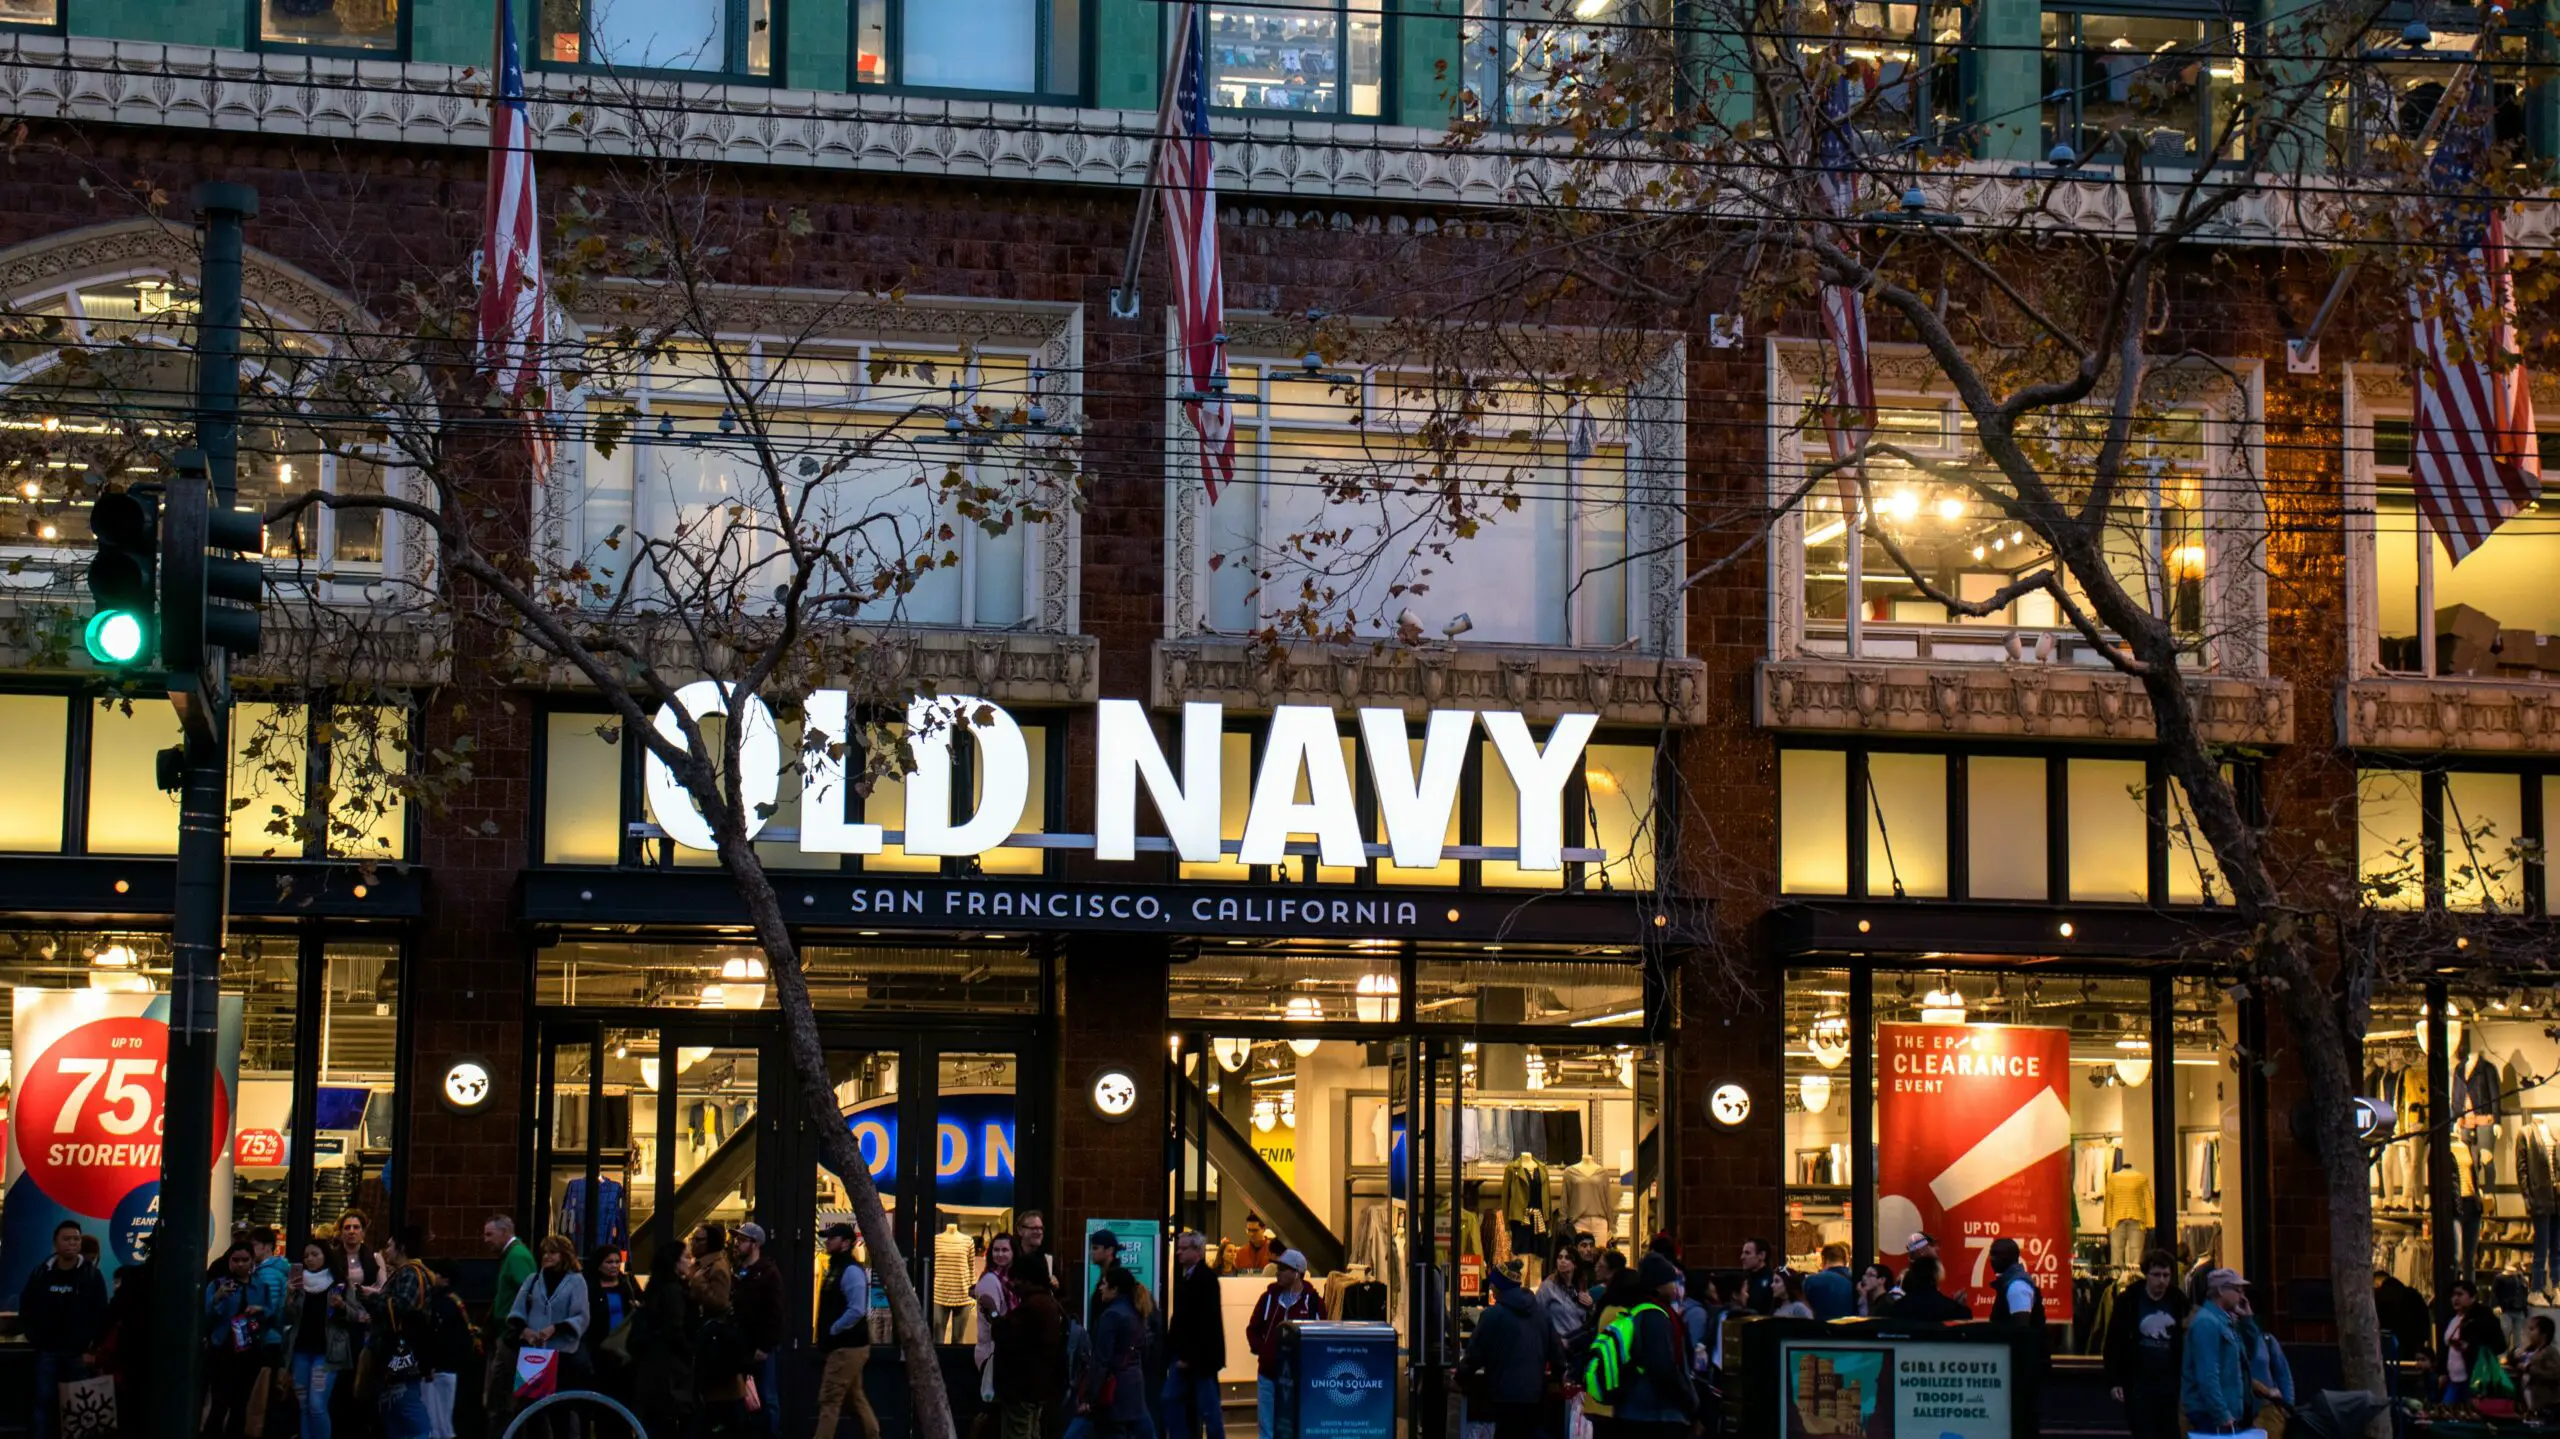 Old Navy Termination Policy